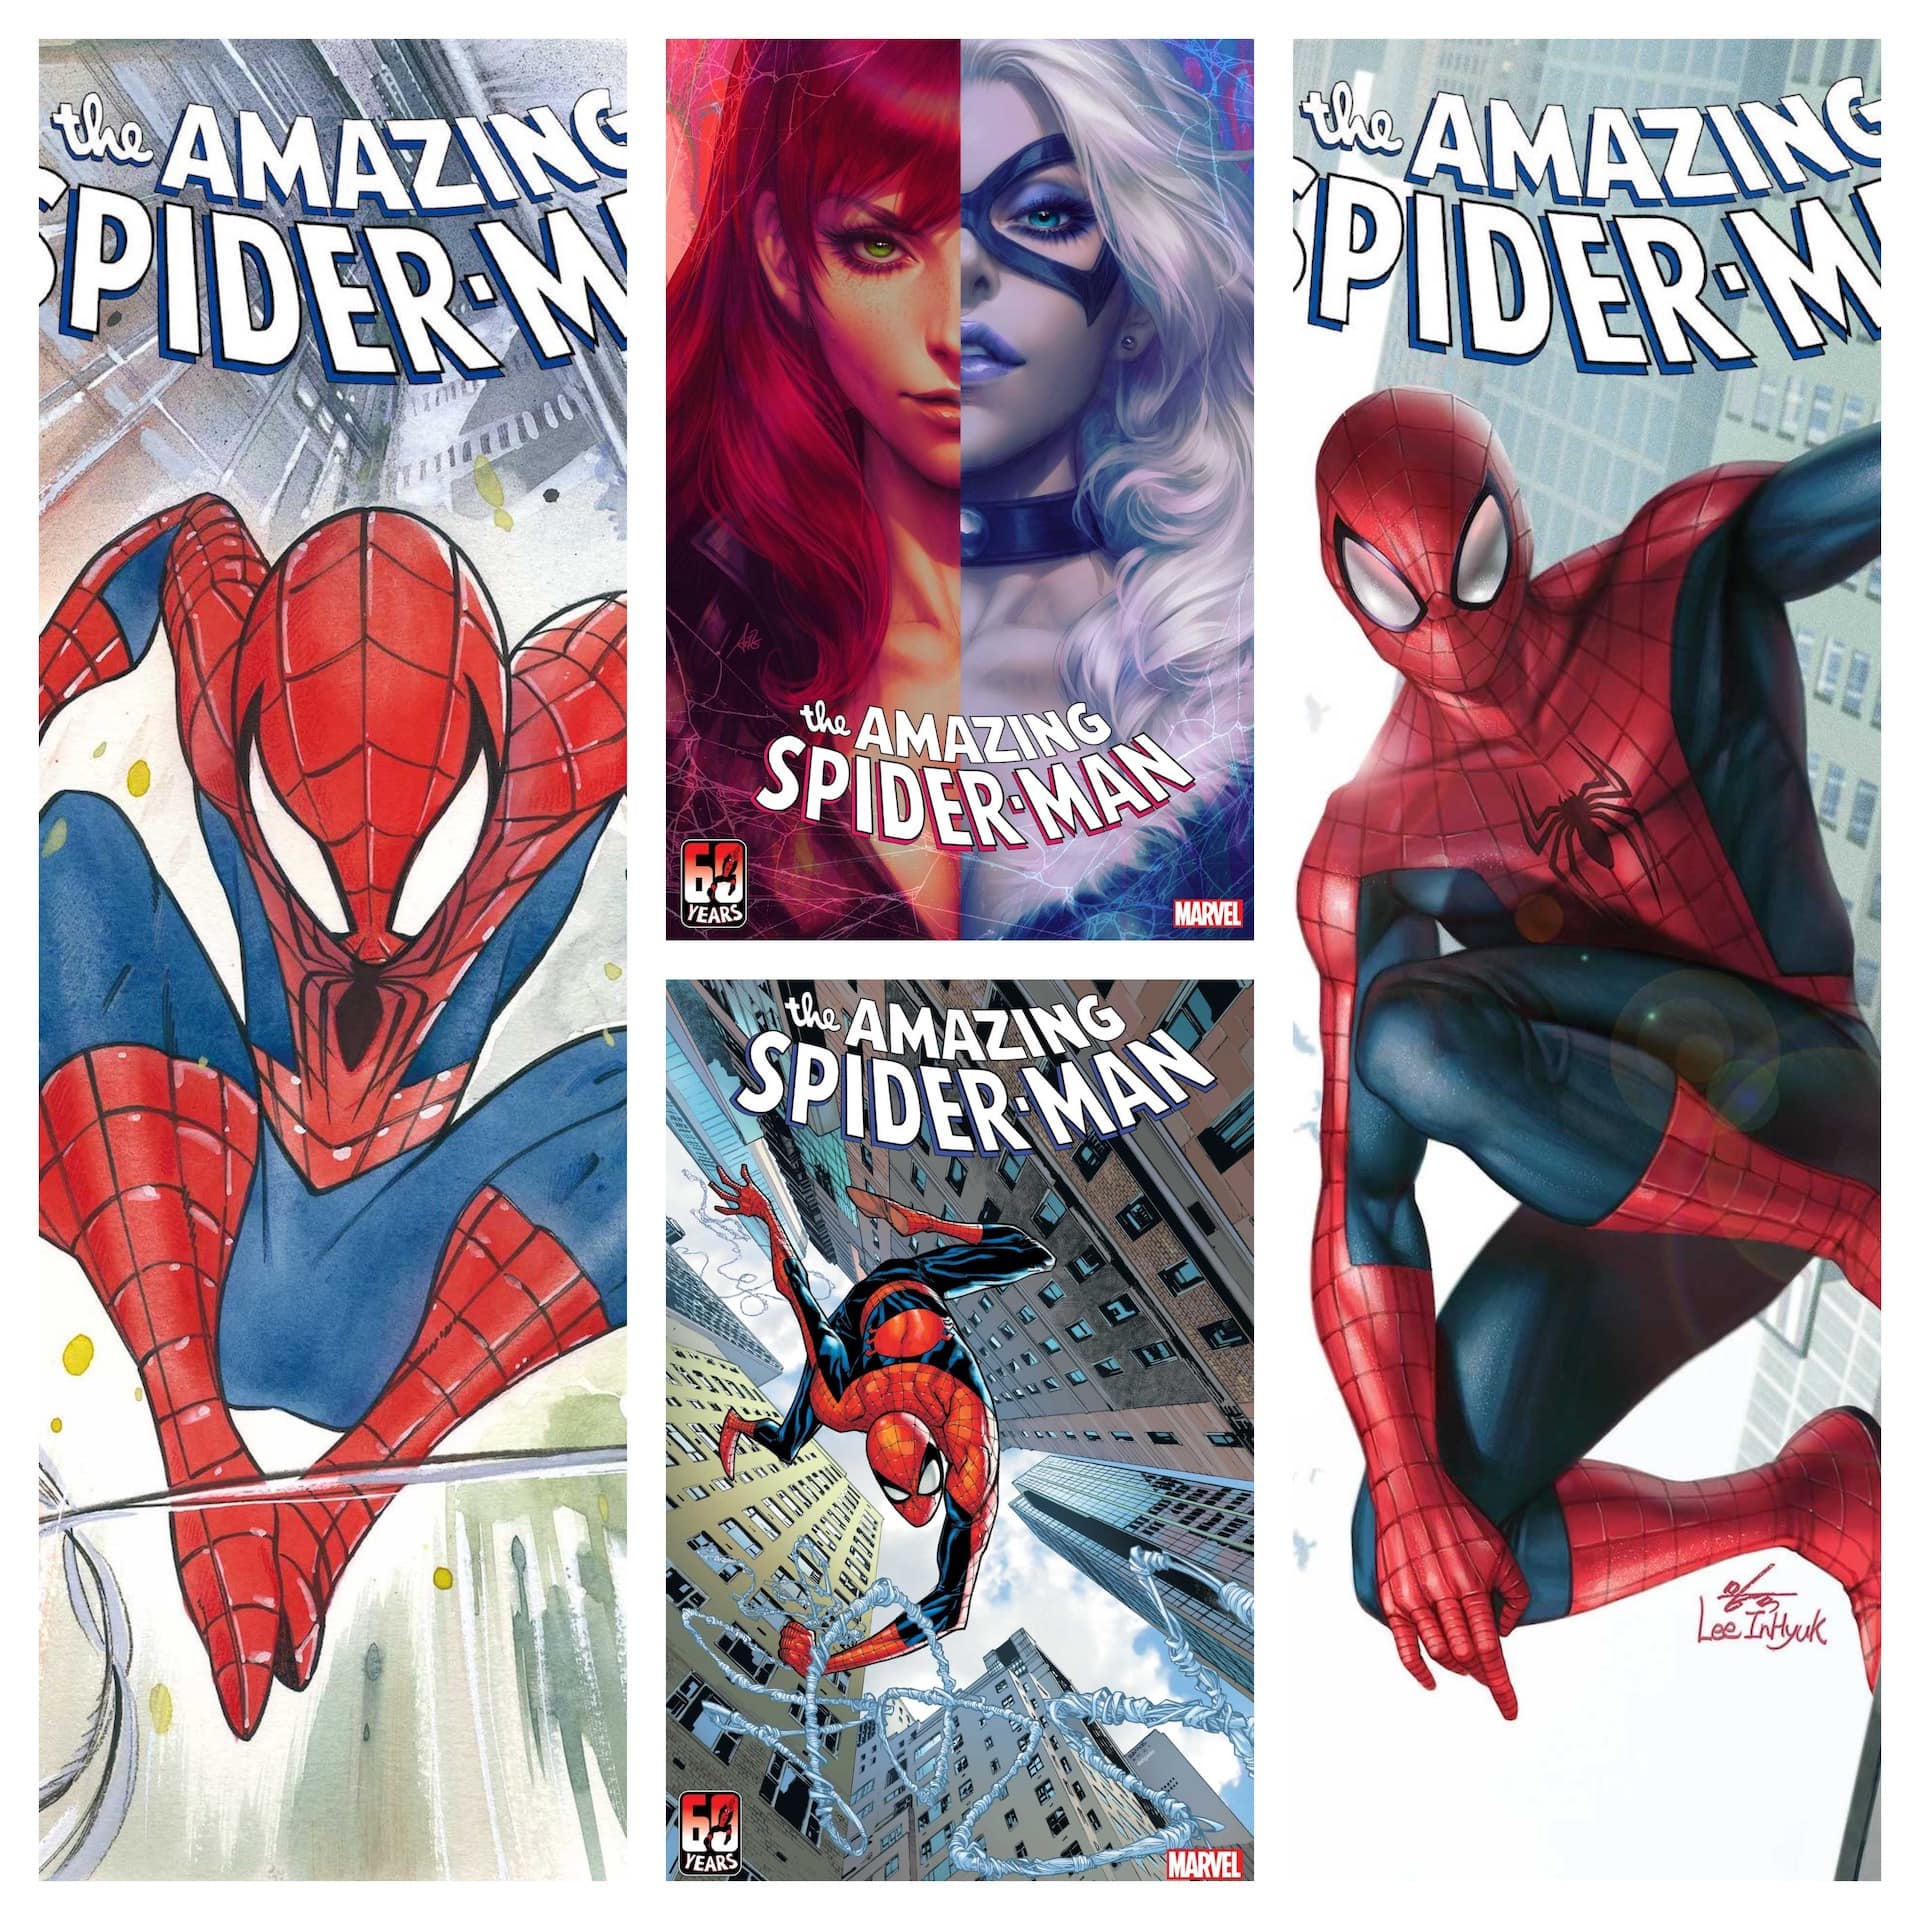 Marvel reveals six 'Amazing Spider-Man' #1 variant covers